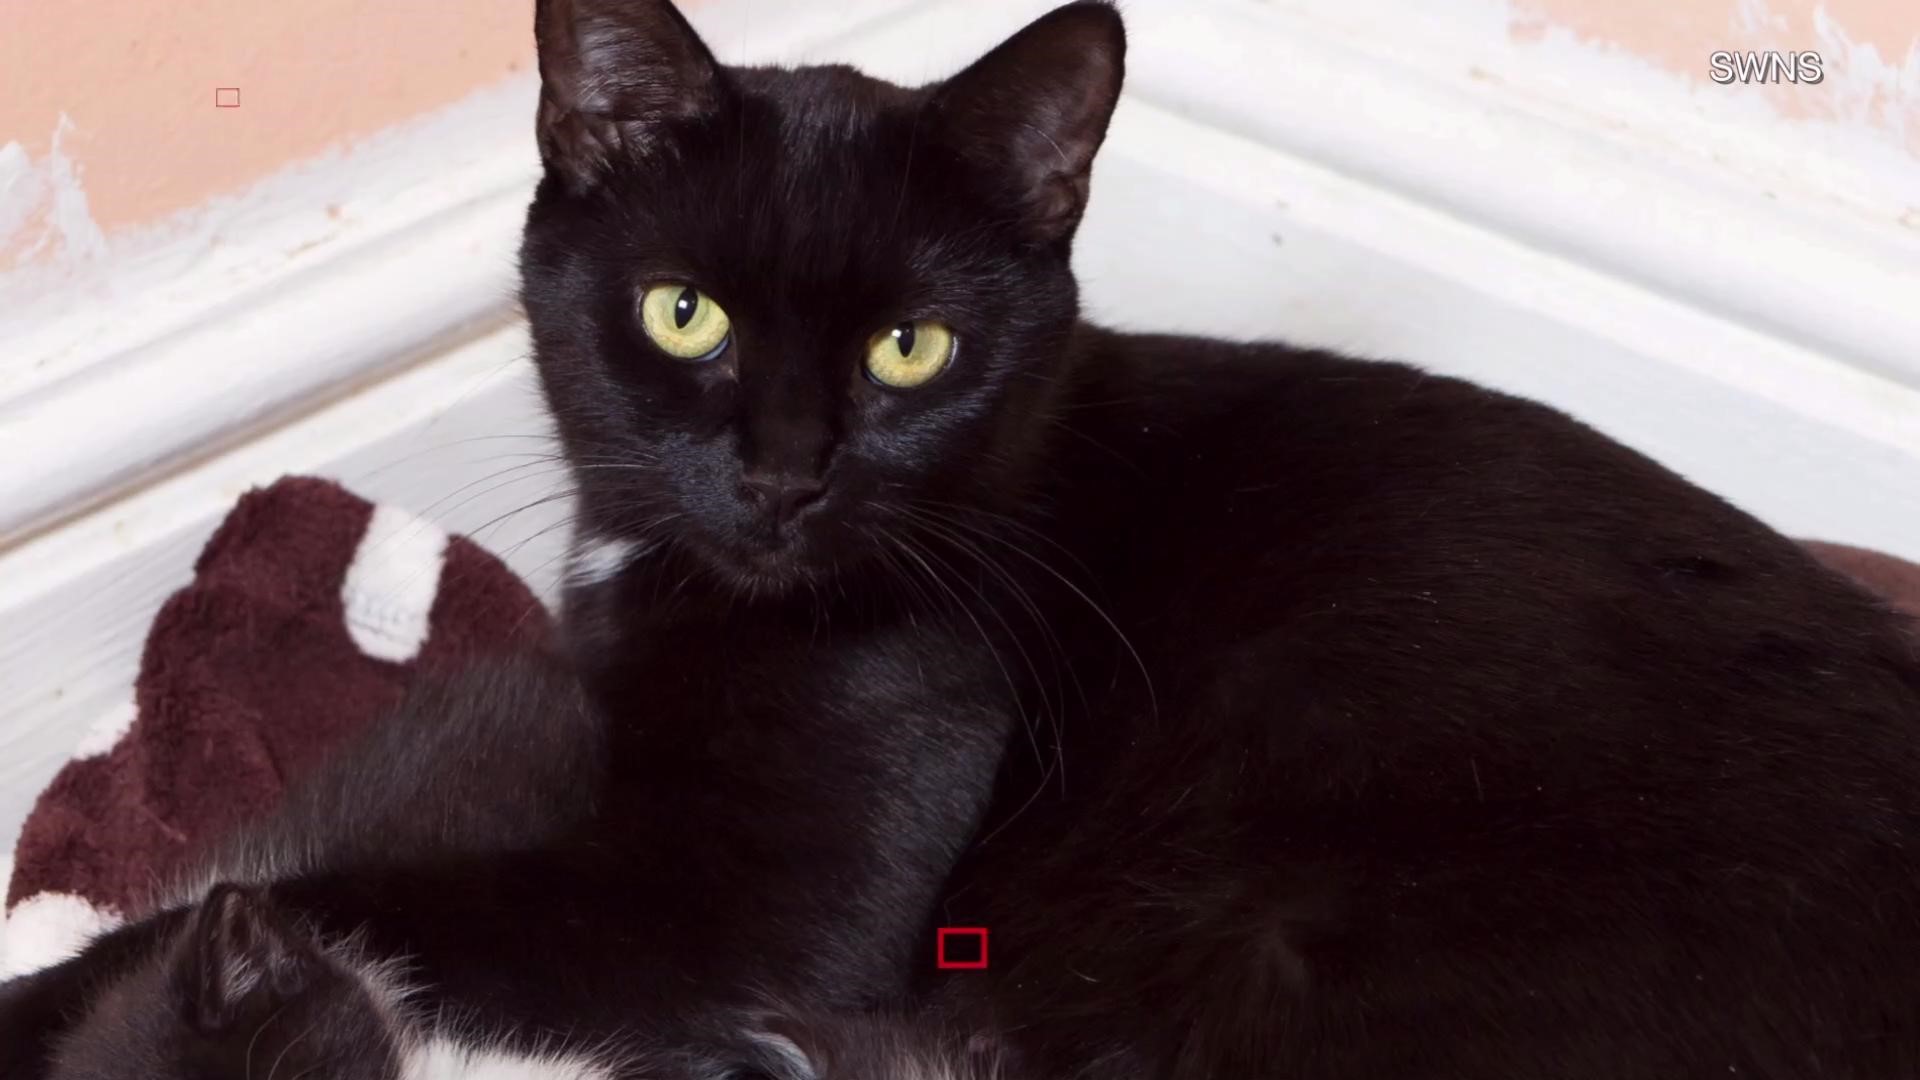 Black cats are not getting adopted because they don't look good in selfies. Elizabeth Keatinge (@elizkeatinge) has more.